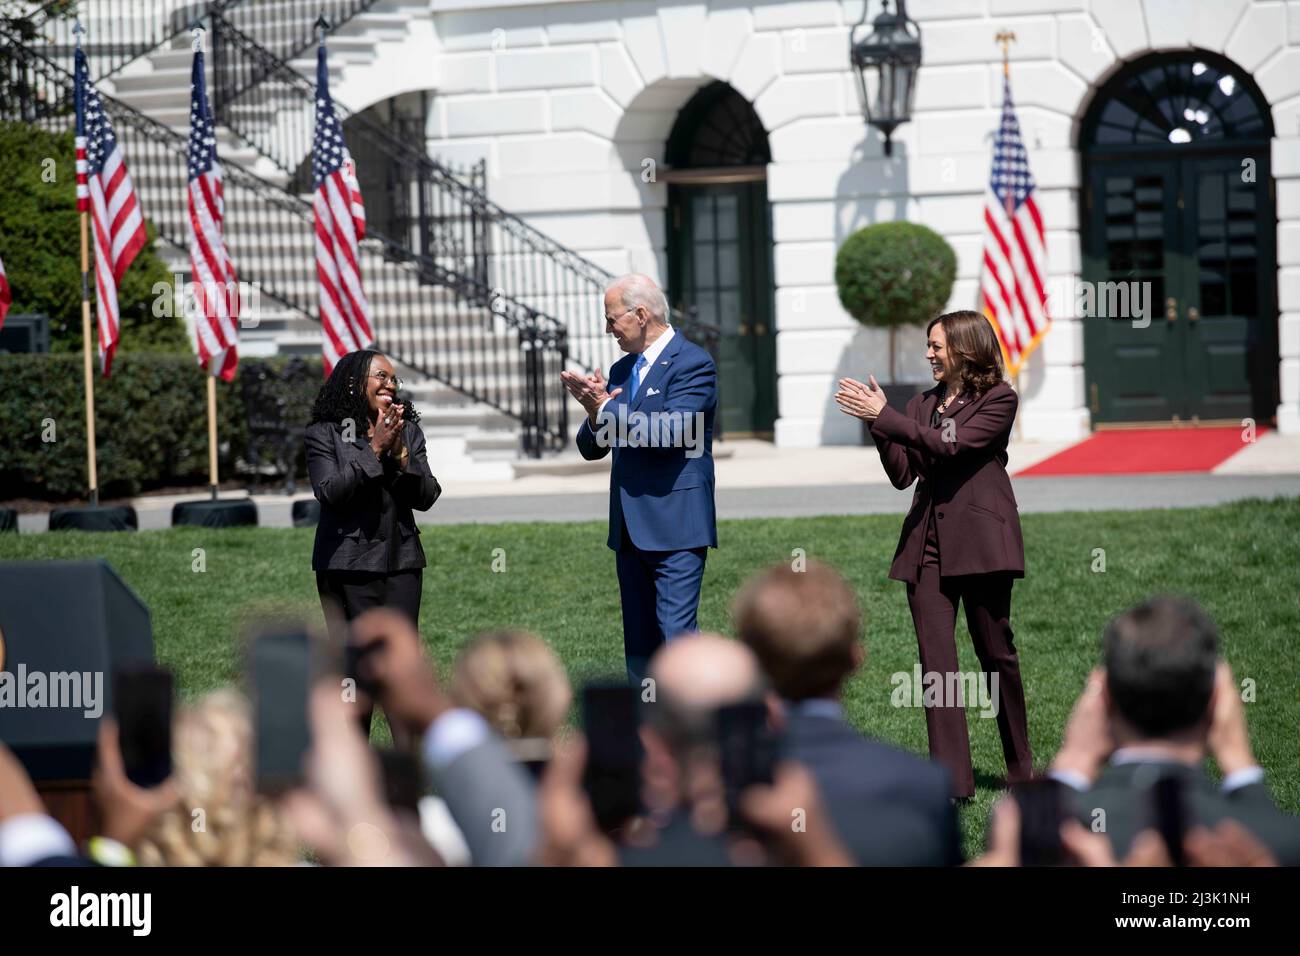 Washington, USA. 8th Apr, 2022. Judge Ketanji Brown Jackson (L), U.S. President Joe Biden (C) and Vice President Kamala Harris attend an event marking the Senate confirmation of Jackson for the Supreme Court at the South Lawn of the White House in Washington, DC, the United States, on April 8, 2022. The White House held the event Friday afternoon to mark the Senate confirmation of the first African American woman for the Supreme Court. Credit: Liu Jie/Xinhua/Alamy Live News Stock Photo